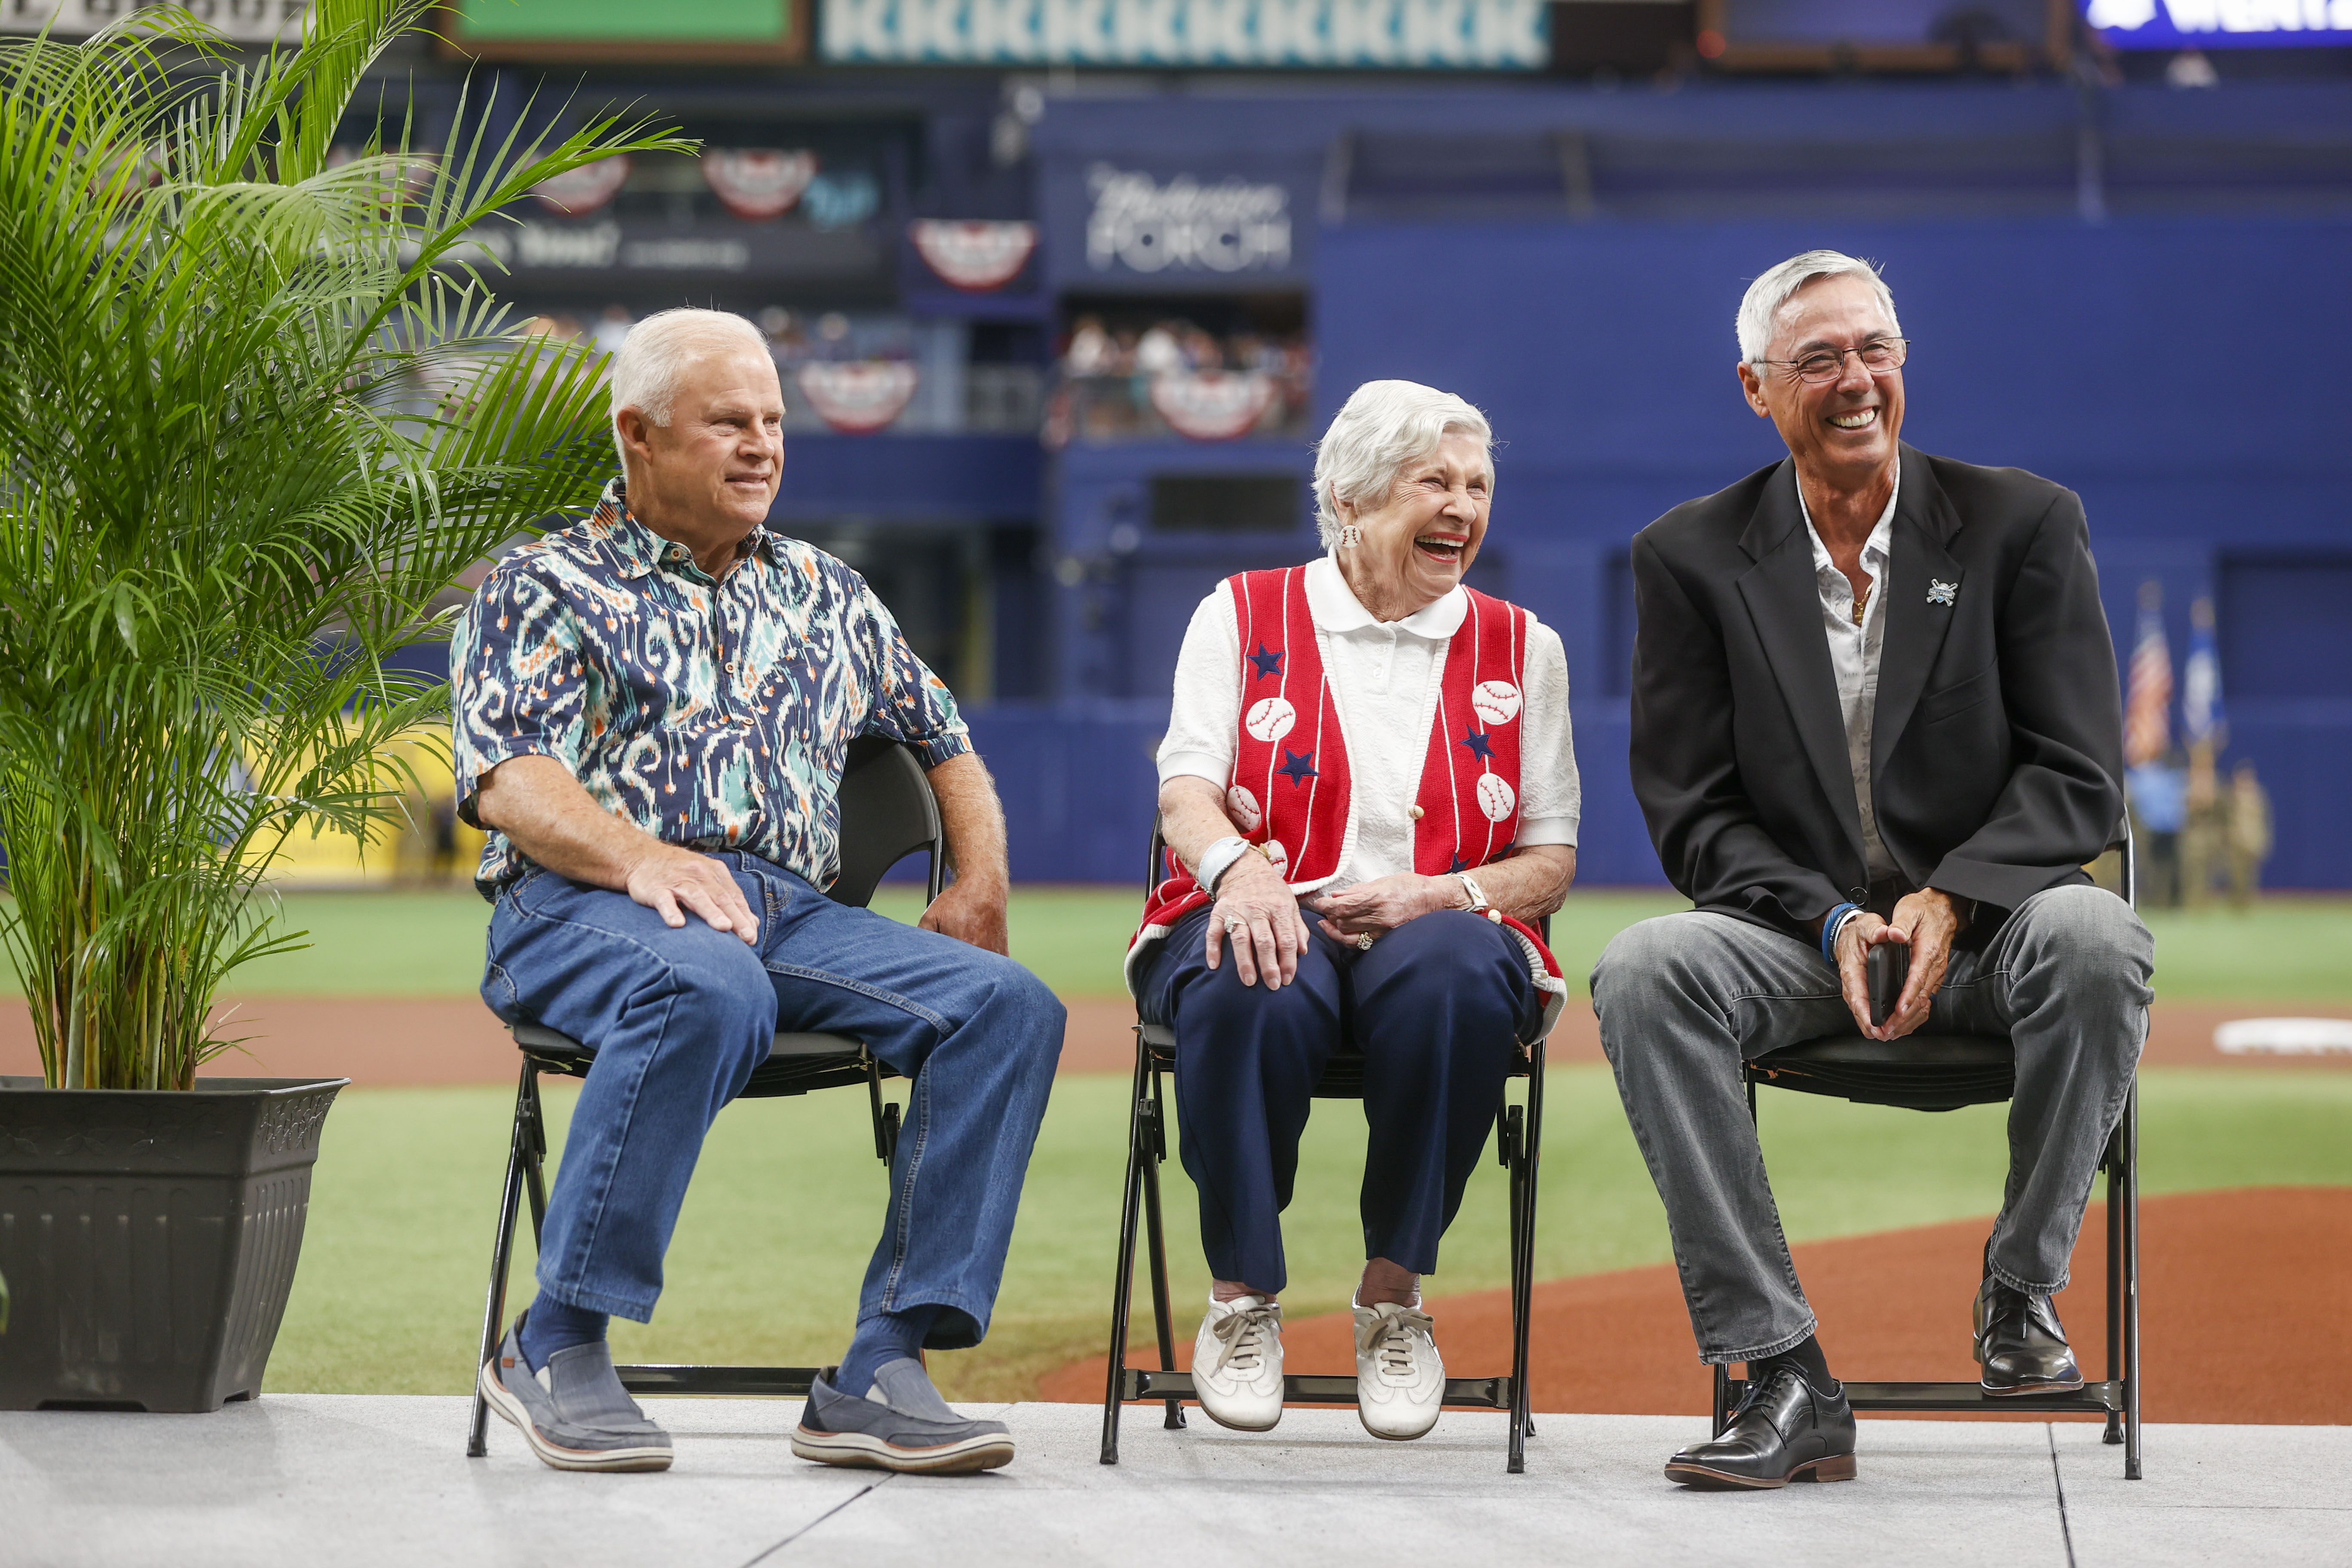 Don Zimmer honoured in pre-game ceremony by Rays